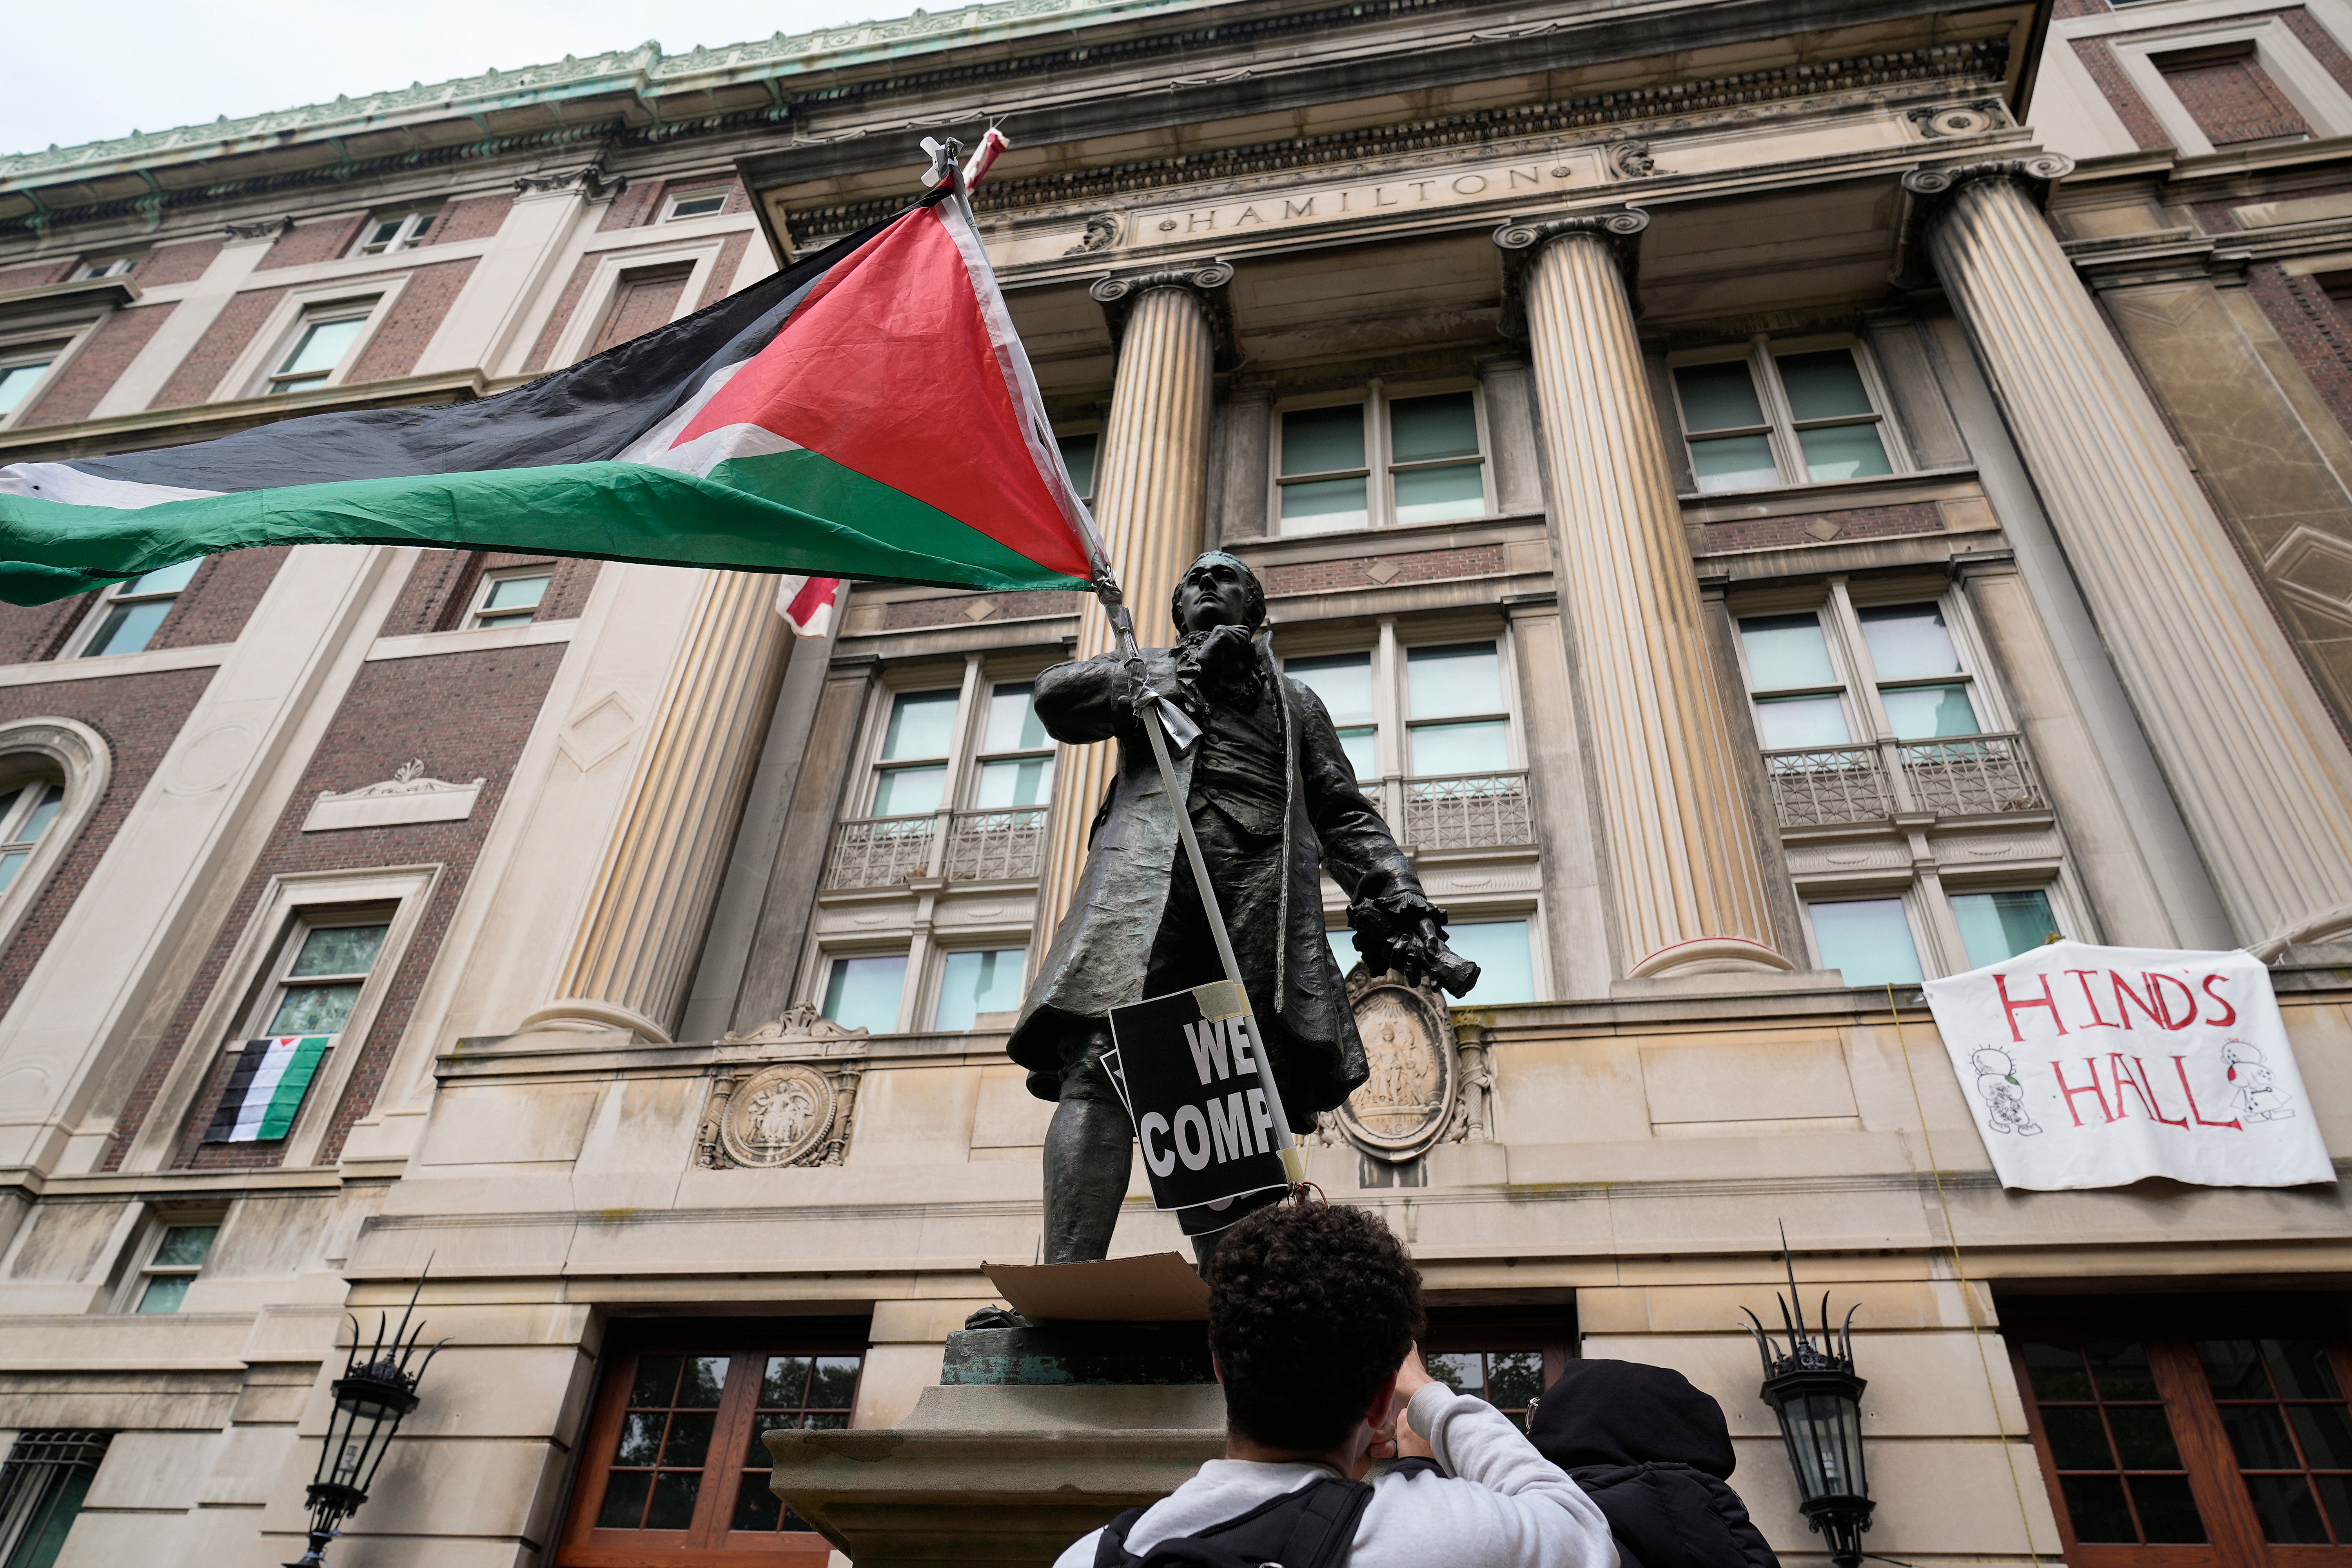 Hamilton Hall at Columbia was renamed ‘Hind’s Hall’ after a Palestinian girl killed